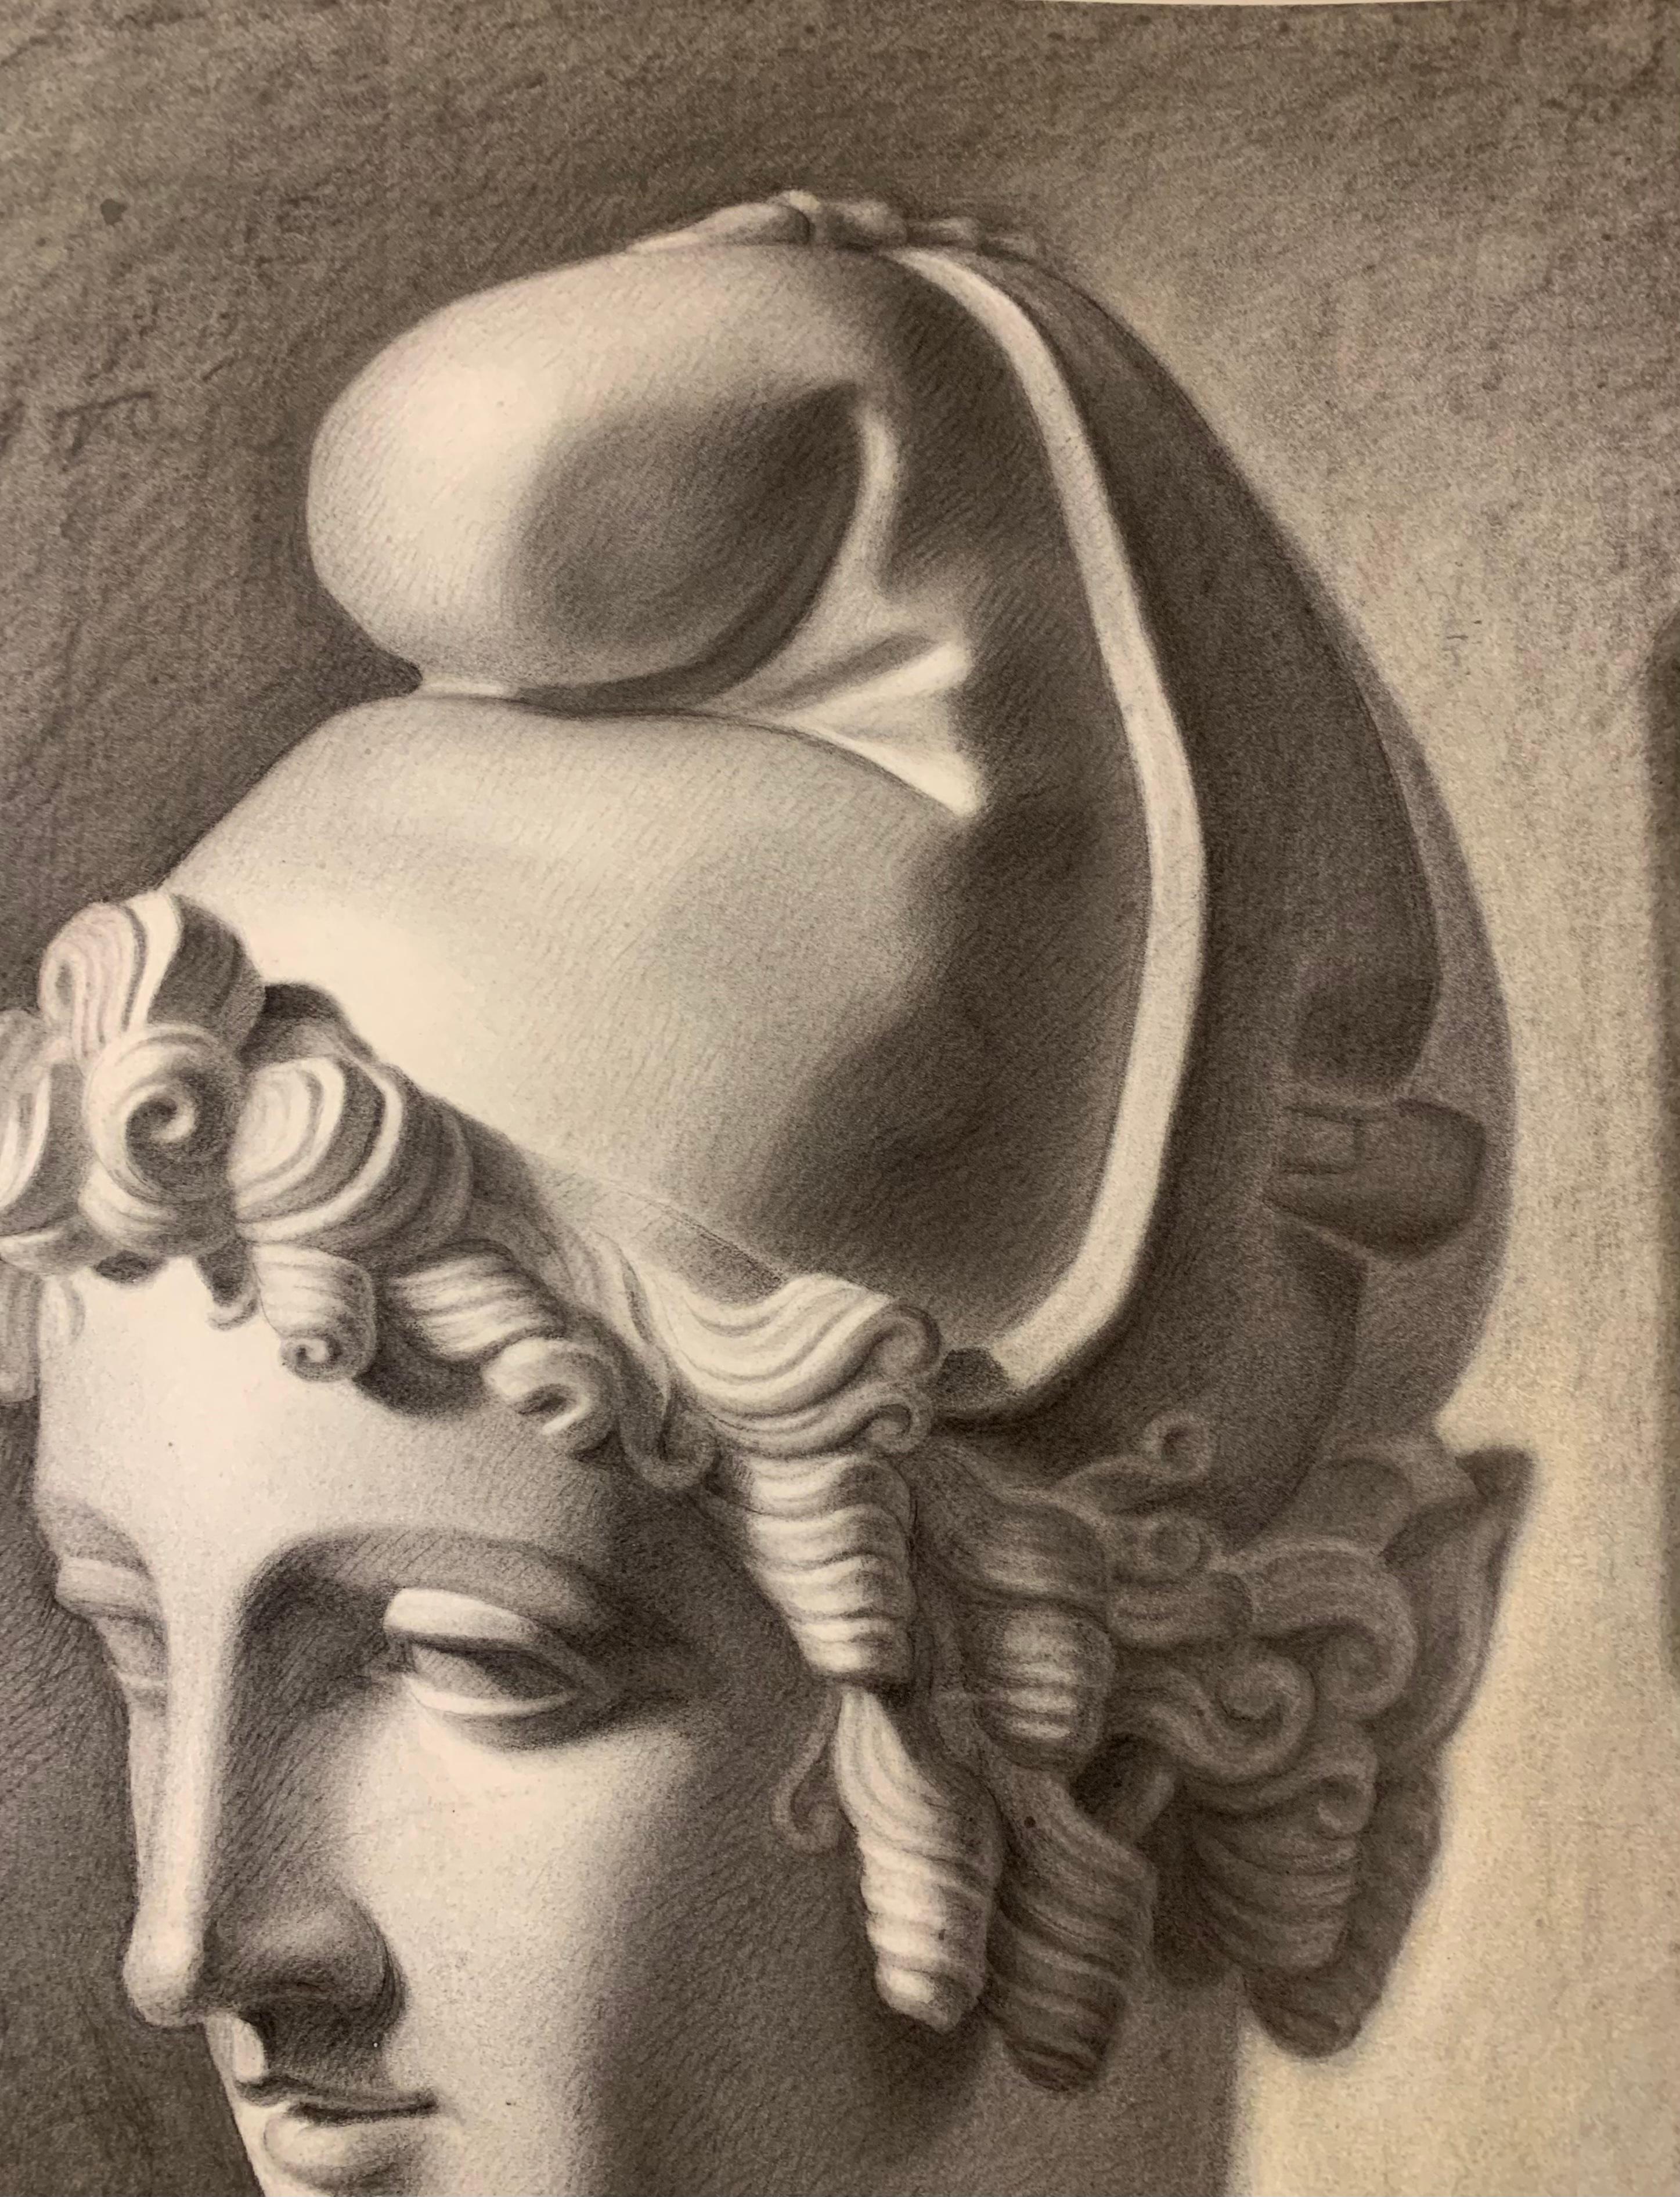 Academic Study of the Head of Paris by Canova (plaster copy)

57 cm x 46.5 cm
Charcoal pencil drawing on matte paper. Excellent conservation conditions. Plaster casts from nineteenth-century academies often drew inspiration not only from classical